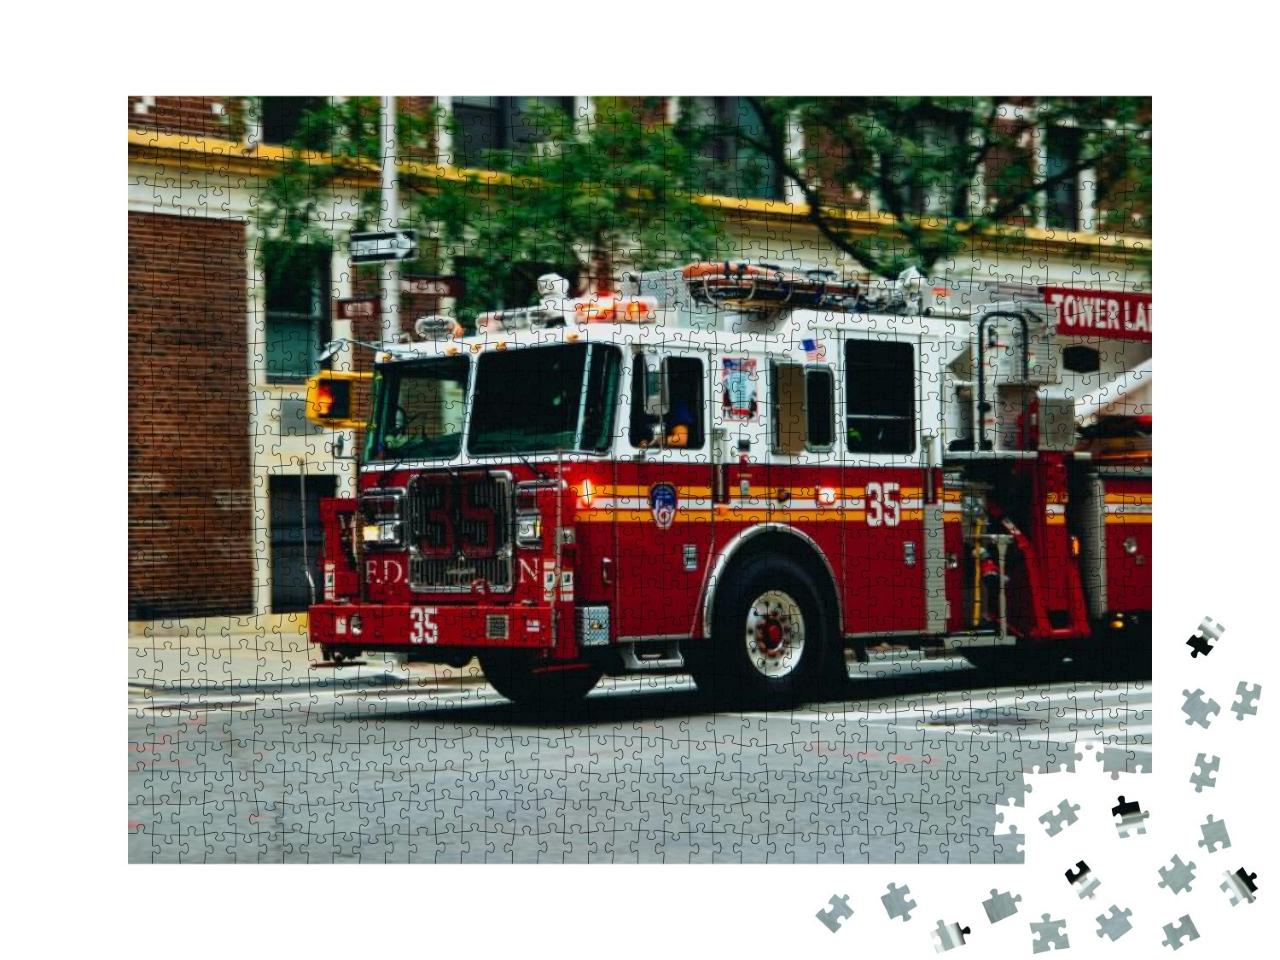 Nyc Firetruck Driving on a Road... Jigsaw Puzzle with 1000 pieces